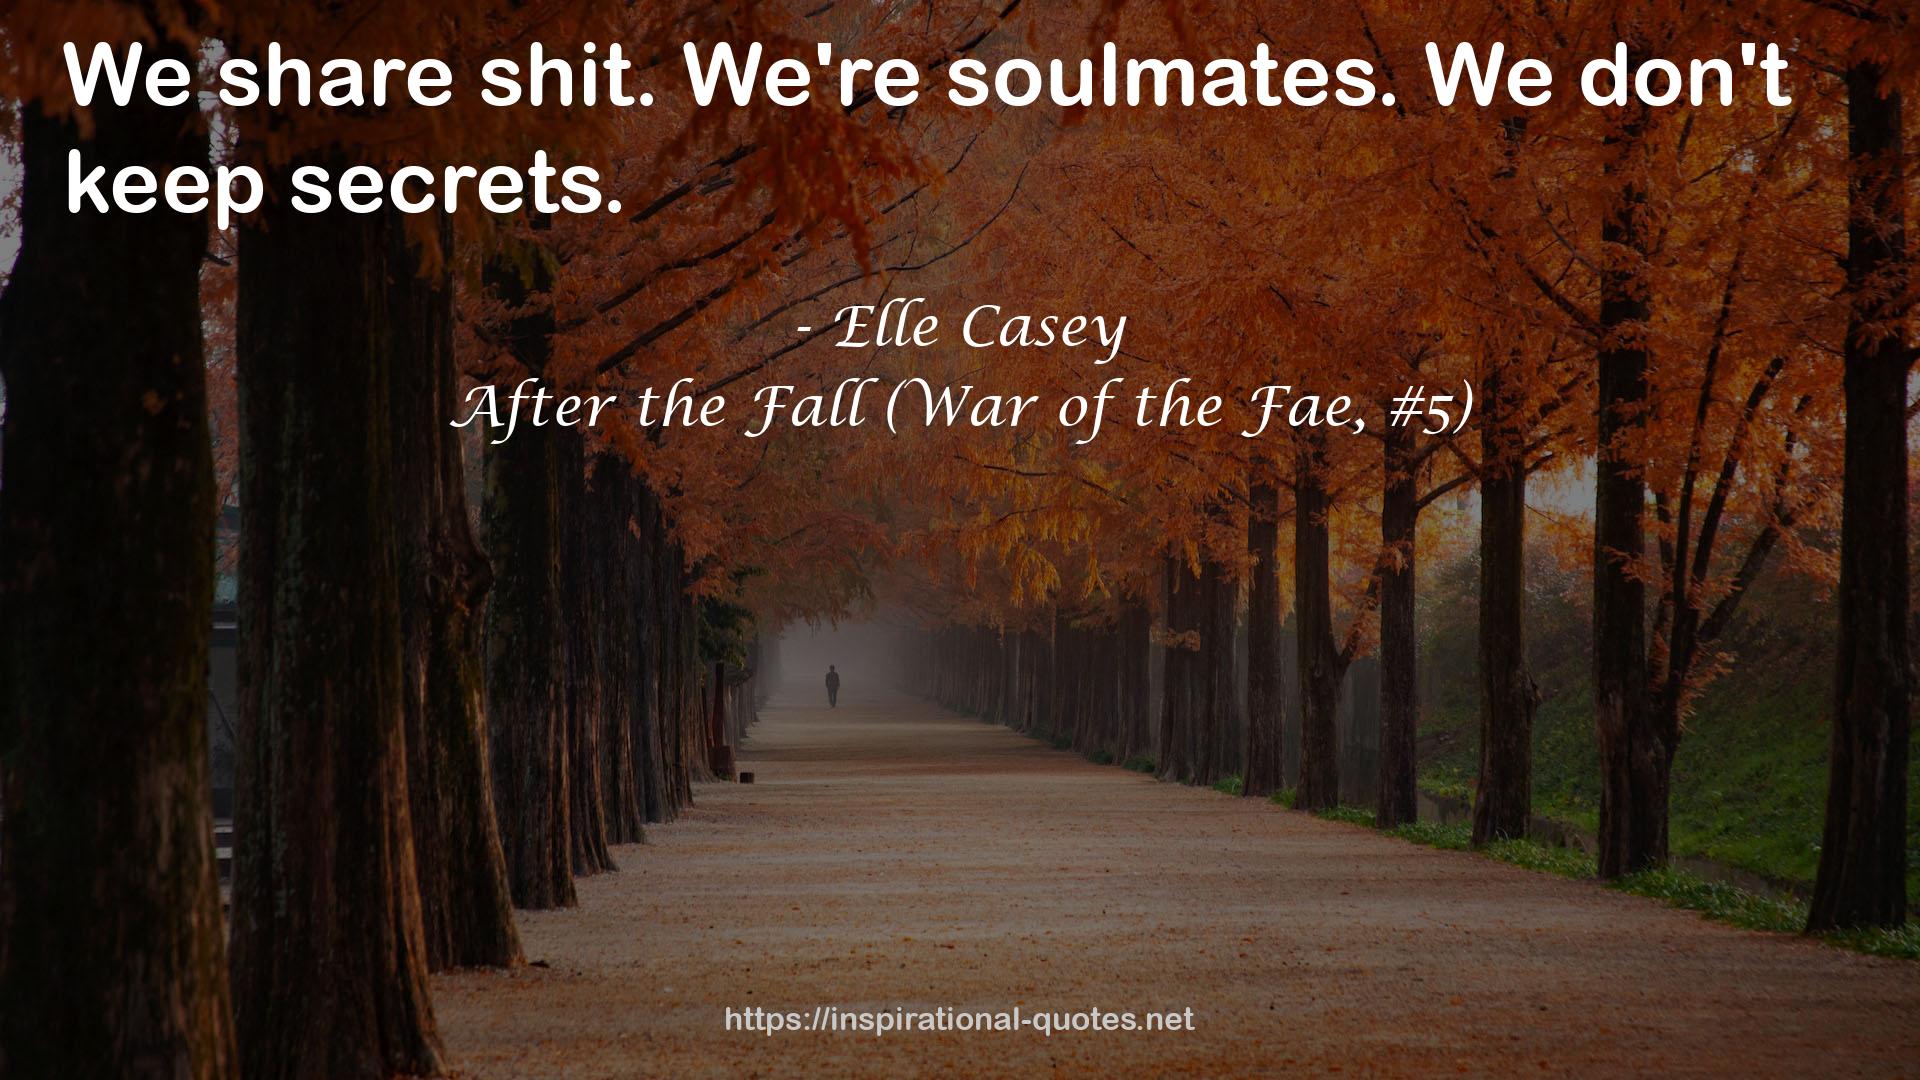 After the Fall (War of the Fae, #5) QUOTES